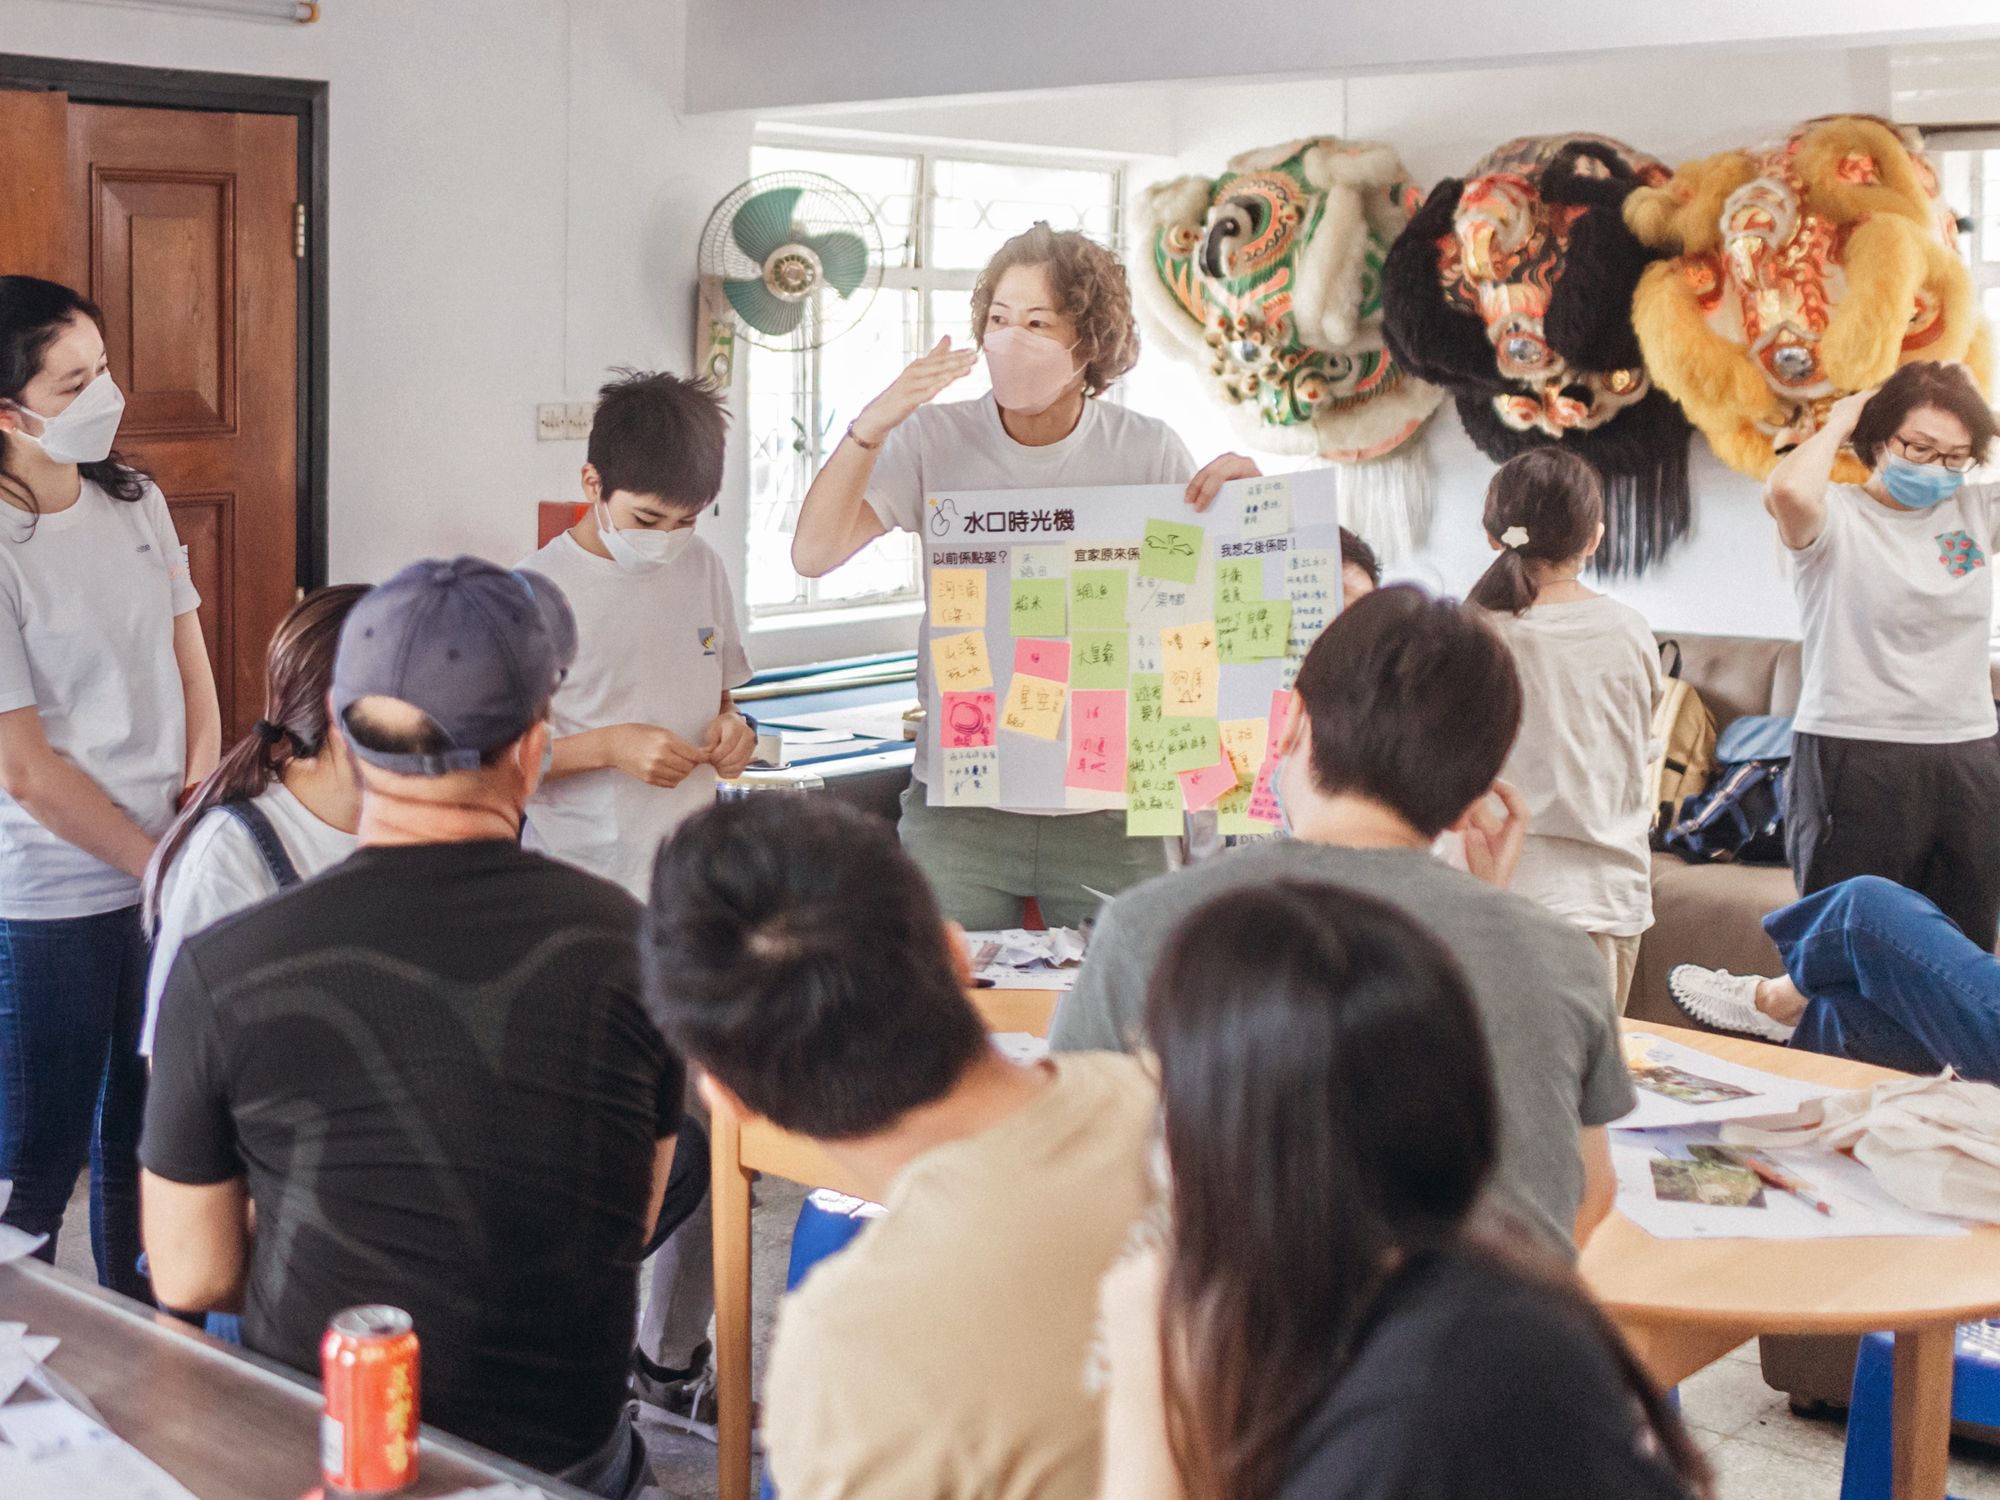 The SLO also held workshops to collect stakeholders’ opinions on topics such as environmental management, biodiversity and village culture of Shui Hau, and painted a mural with some of the discussion results.